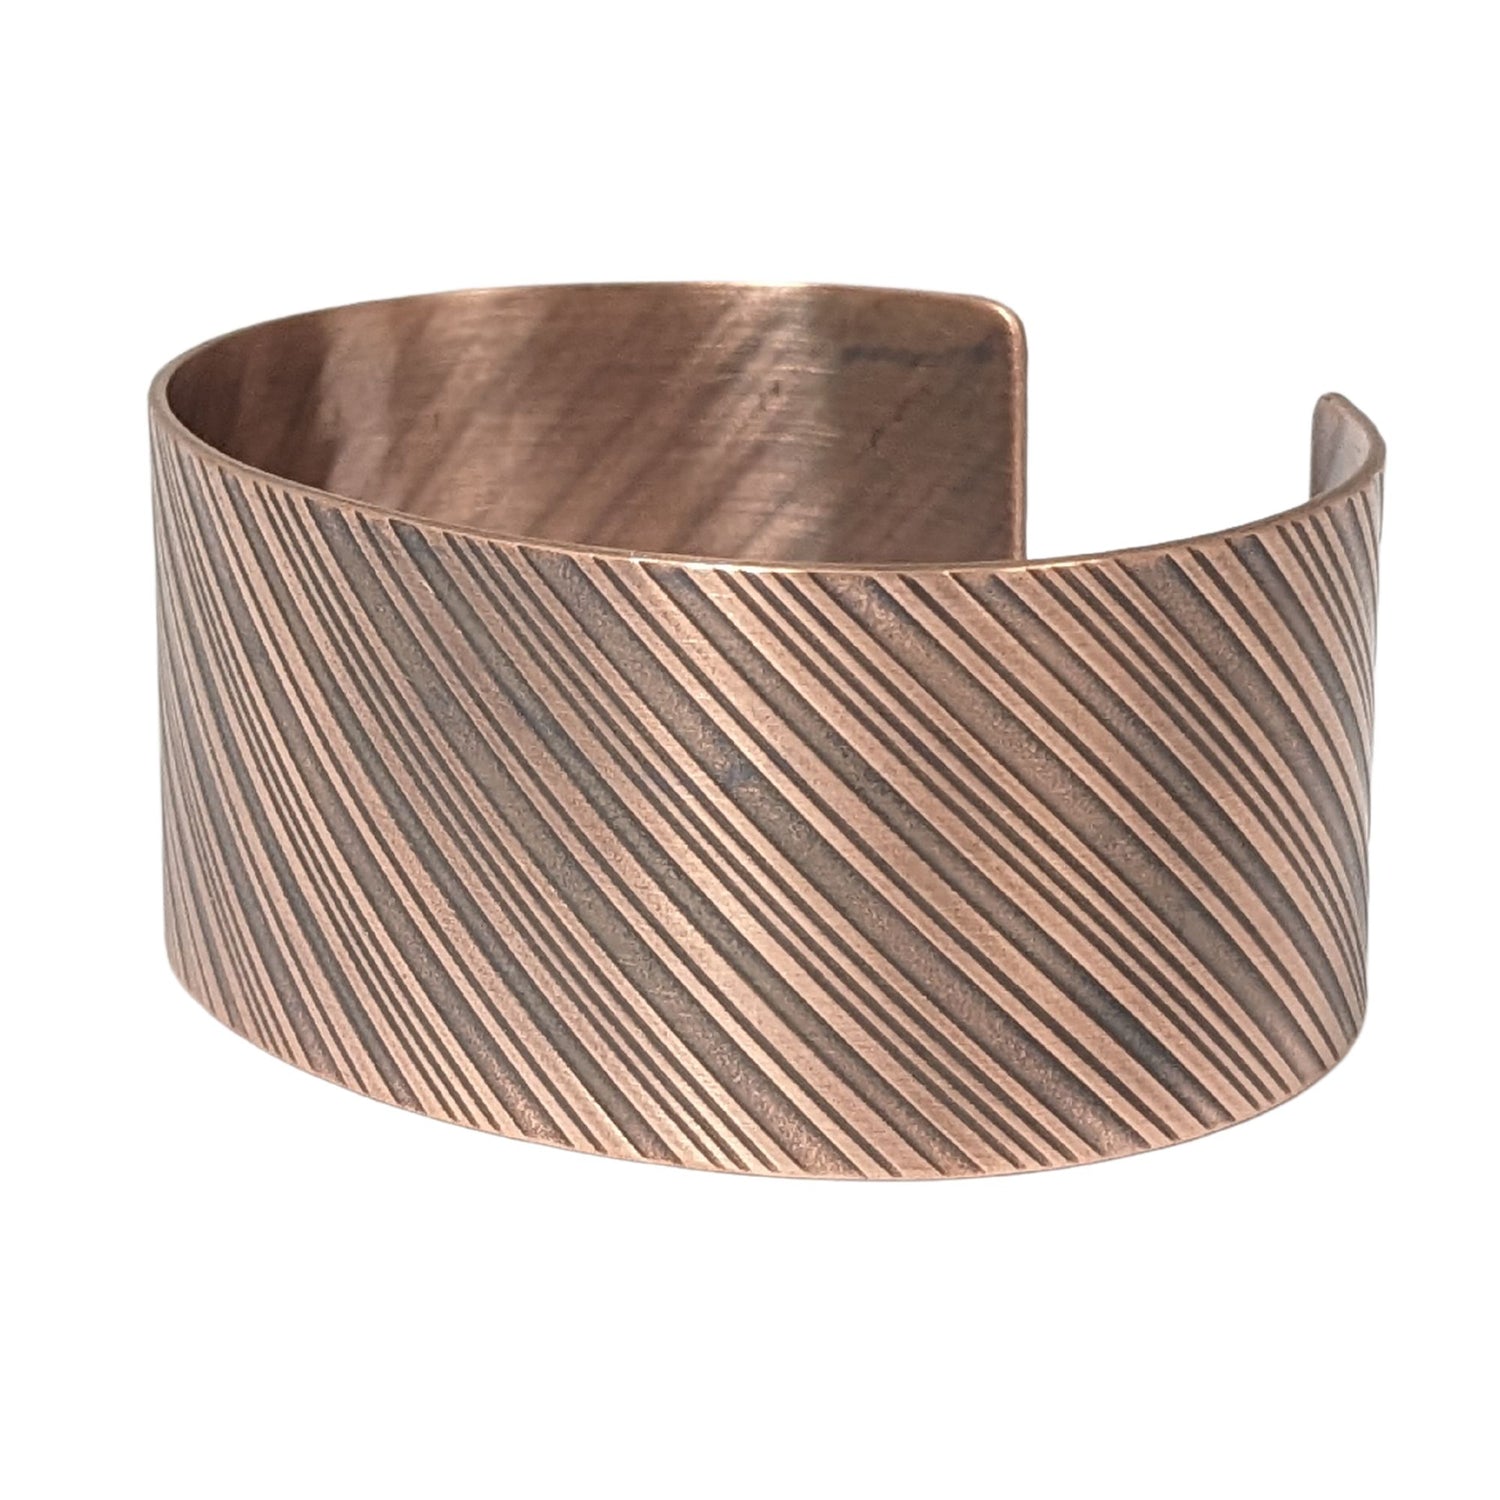 copper cuff bracelet with diagonal stripes like found on candy canes